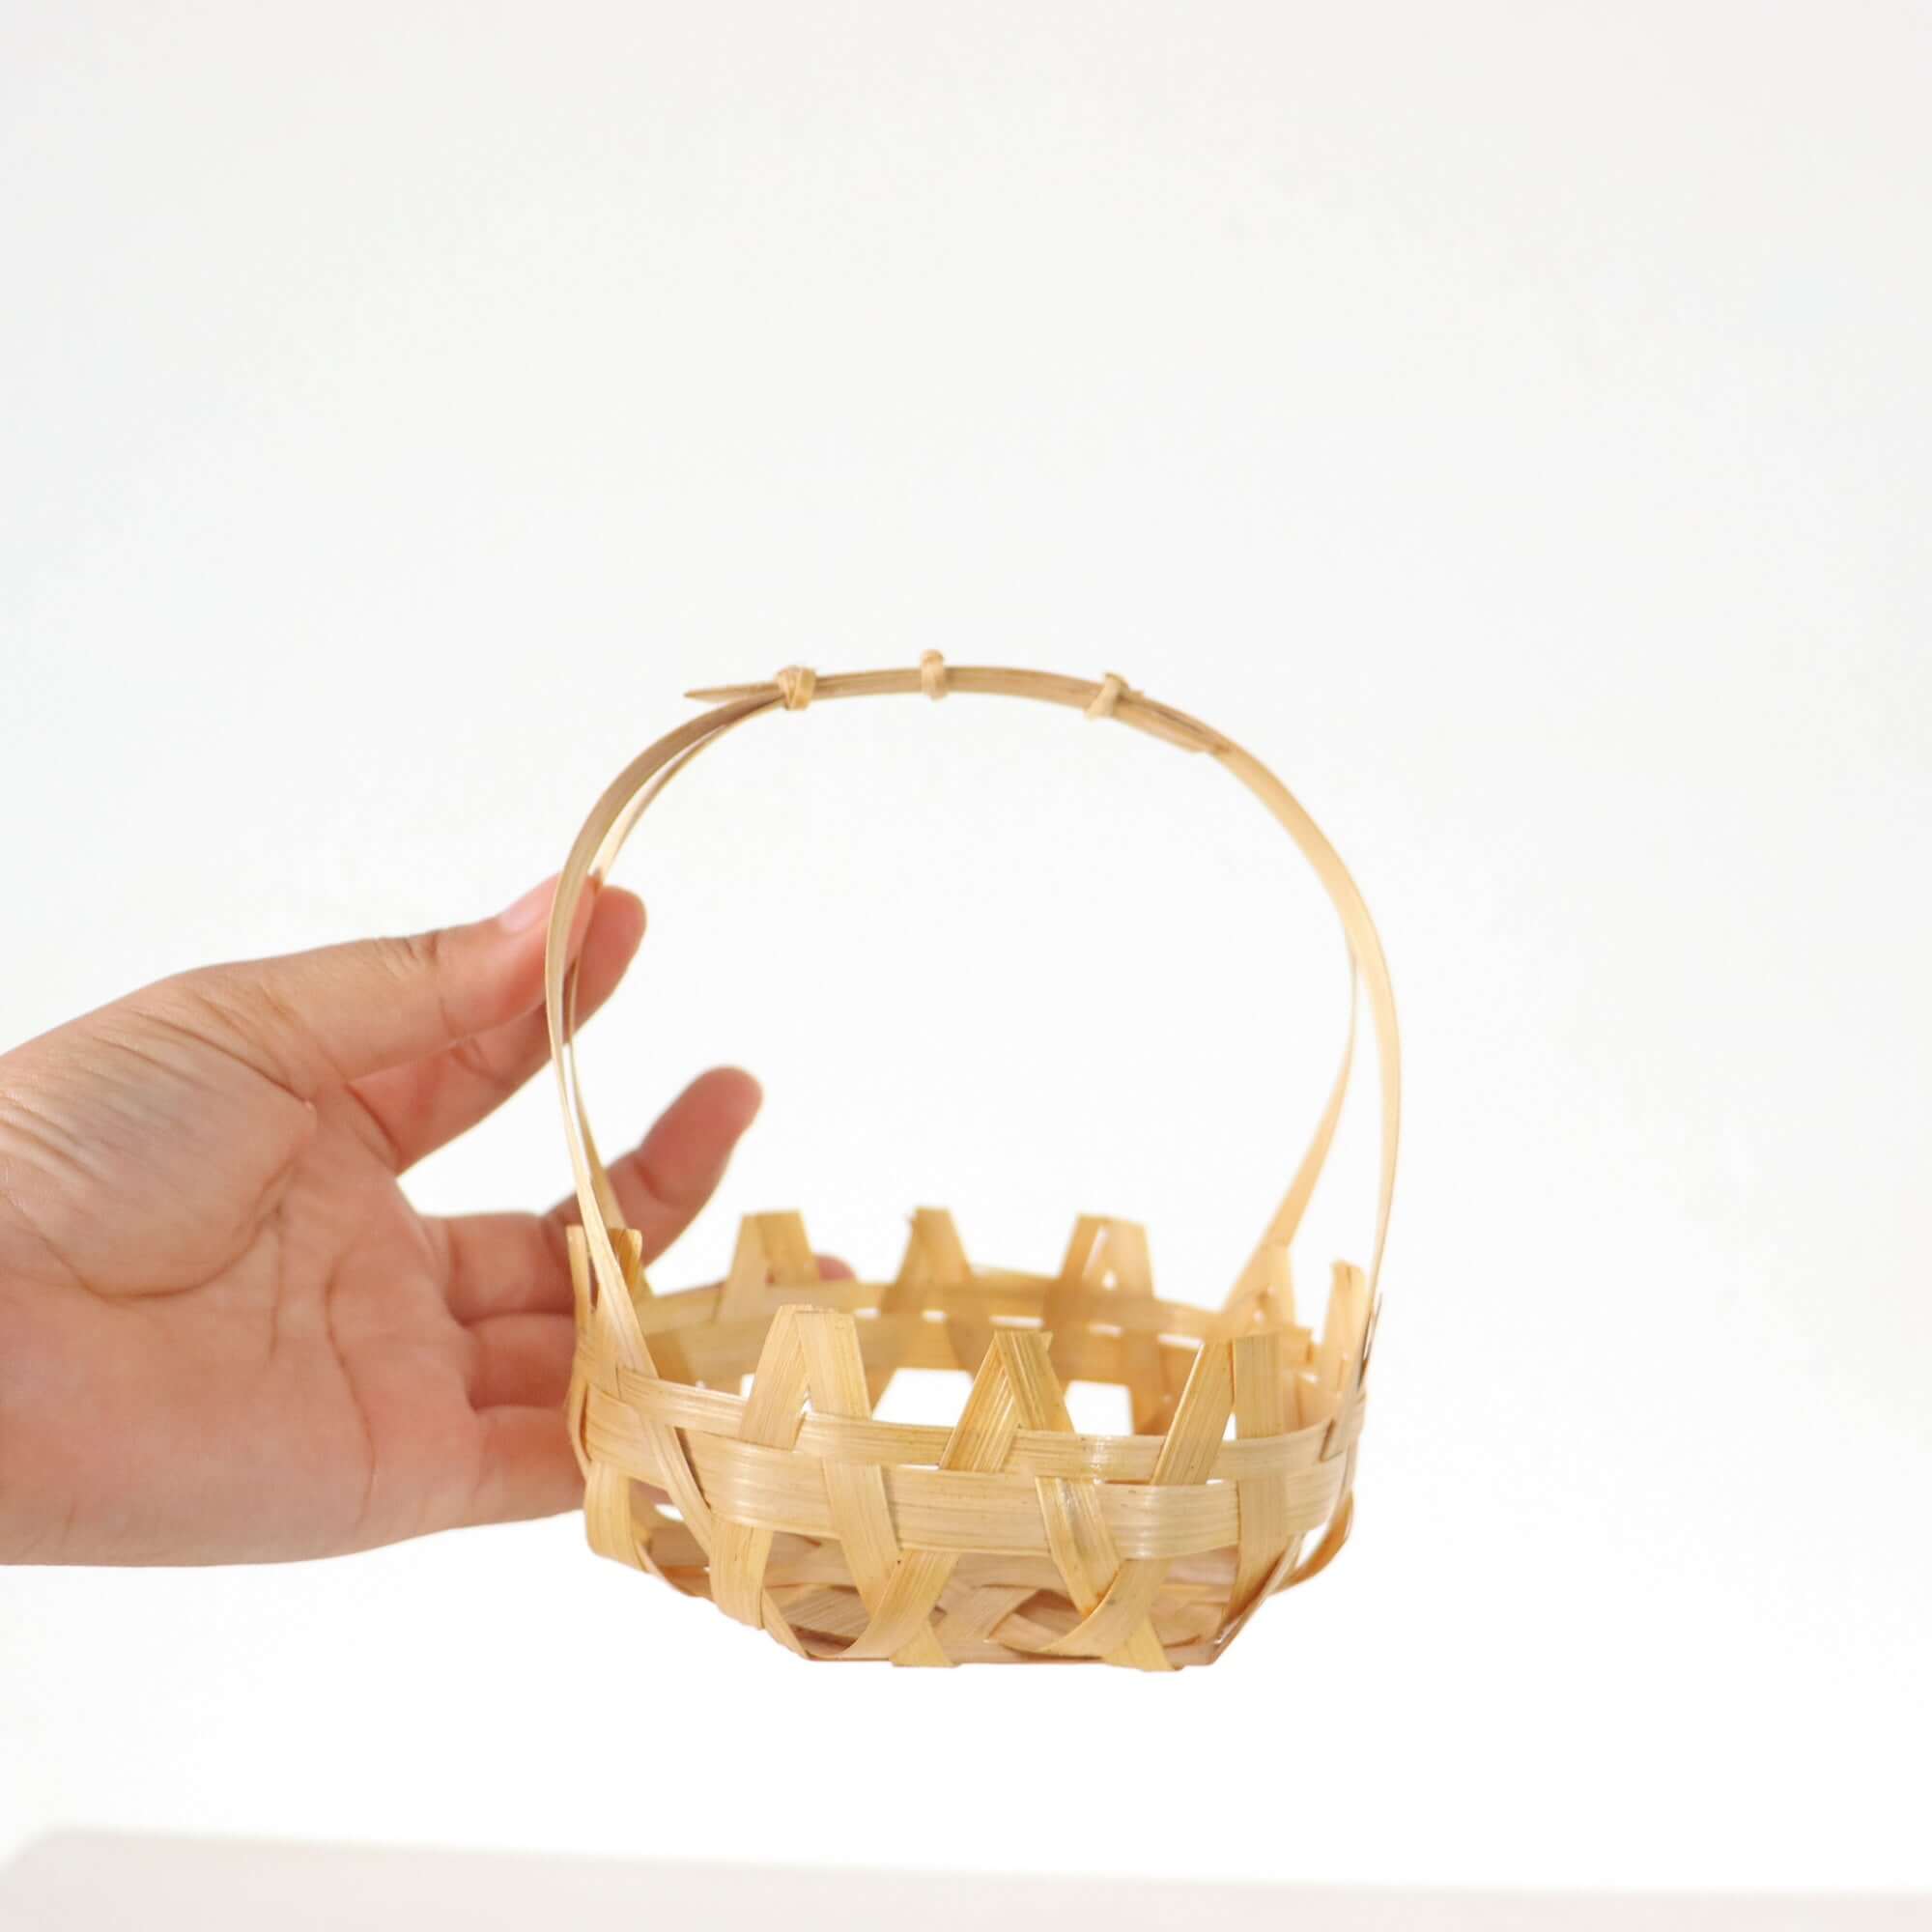 Bamboo Basket for Catering 24 pcs. per Pack - MA NO CHA